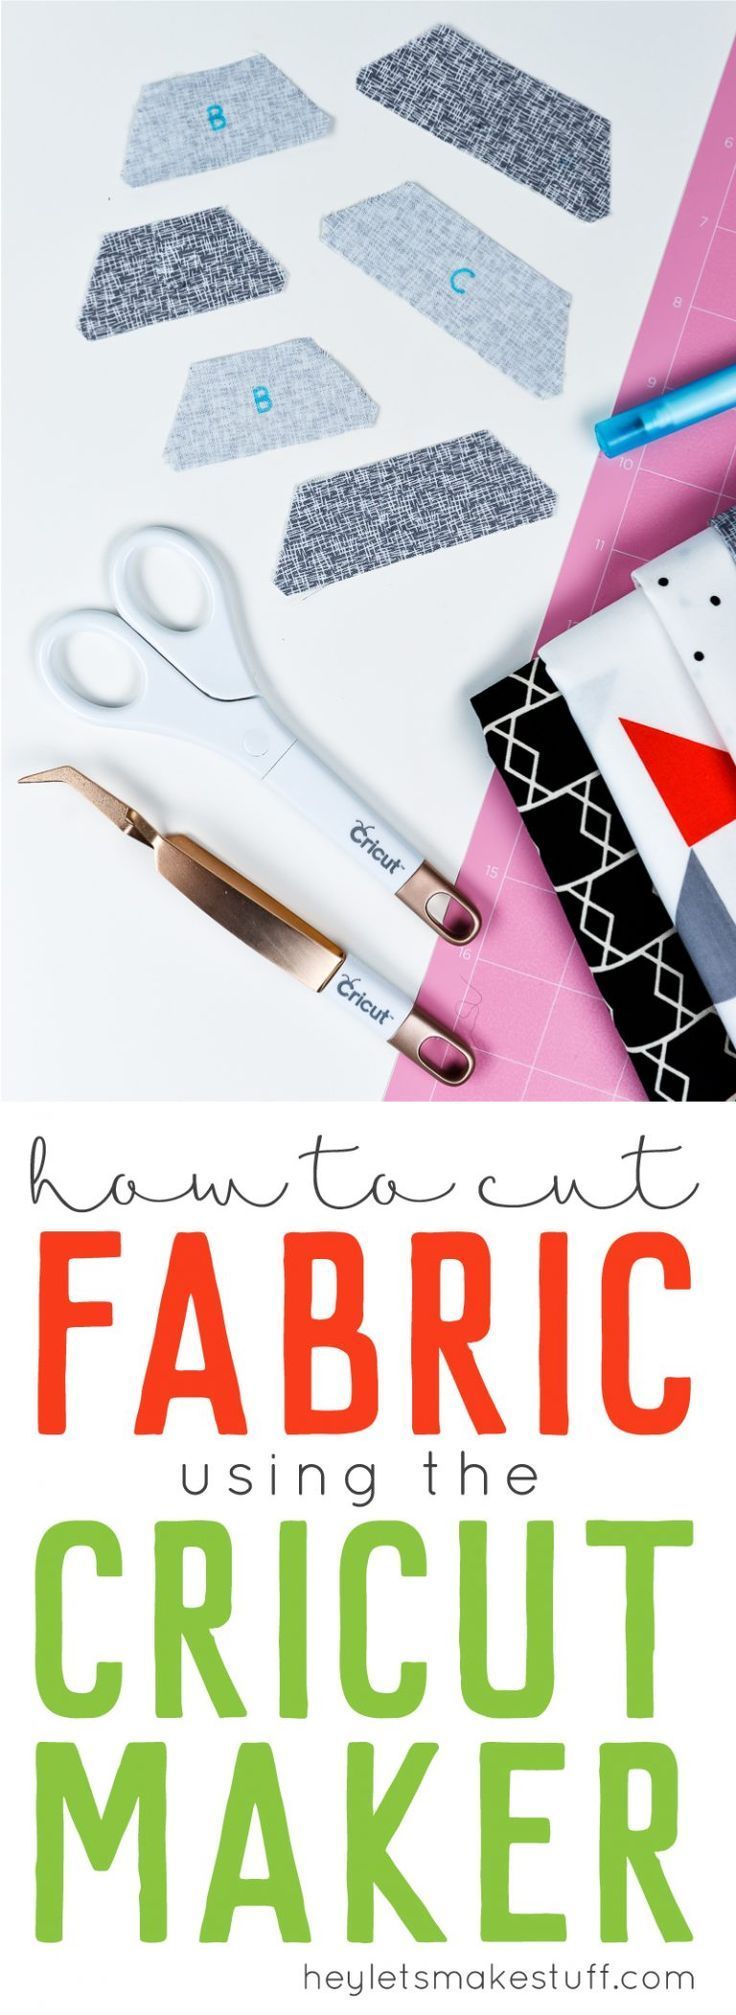 How to Cut Fabric on the Cricut Maker -   19 fabric crafts To Sell tips ideas